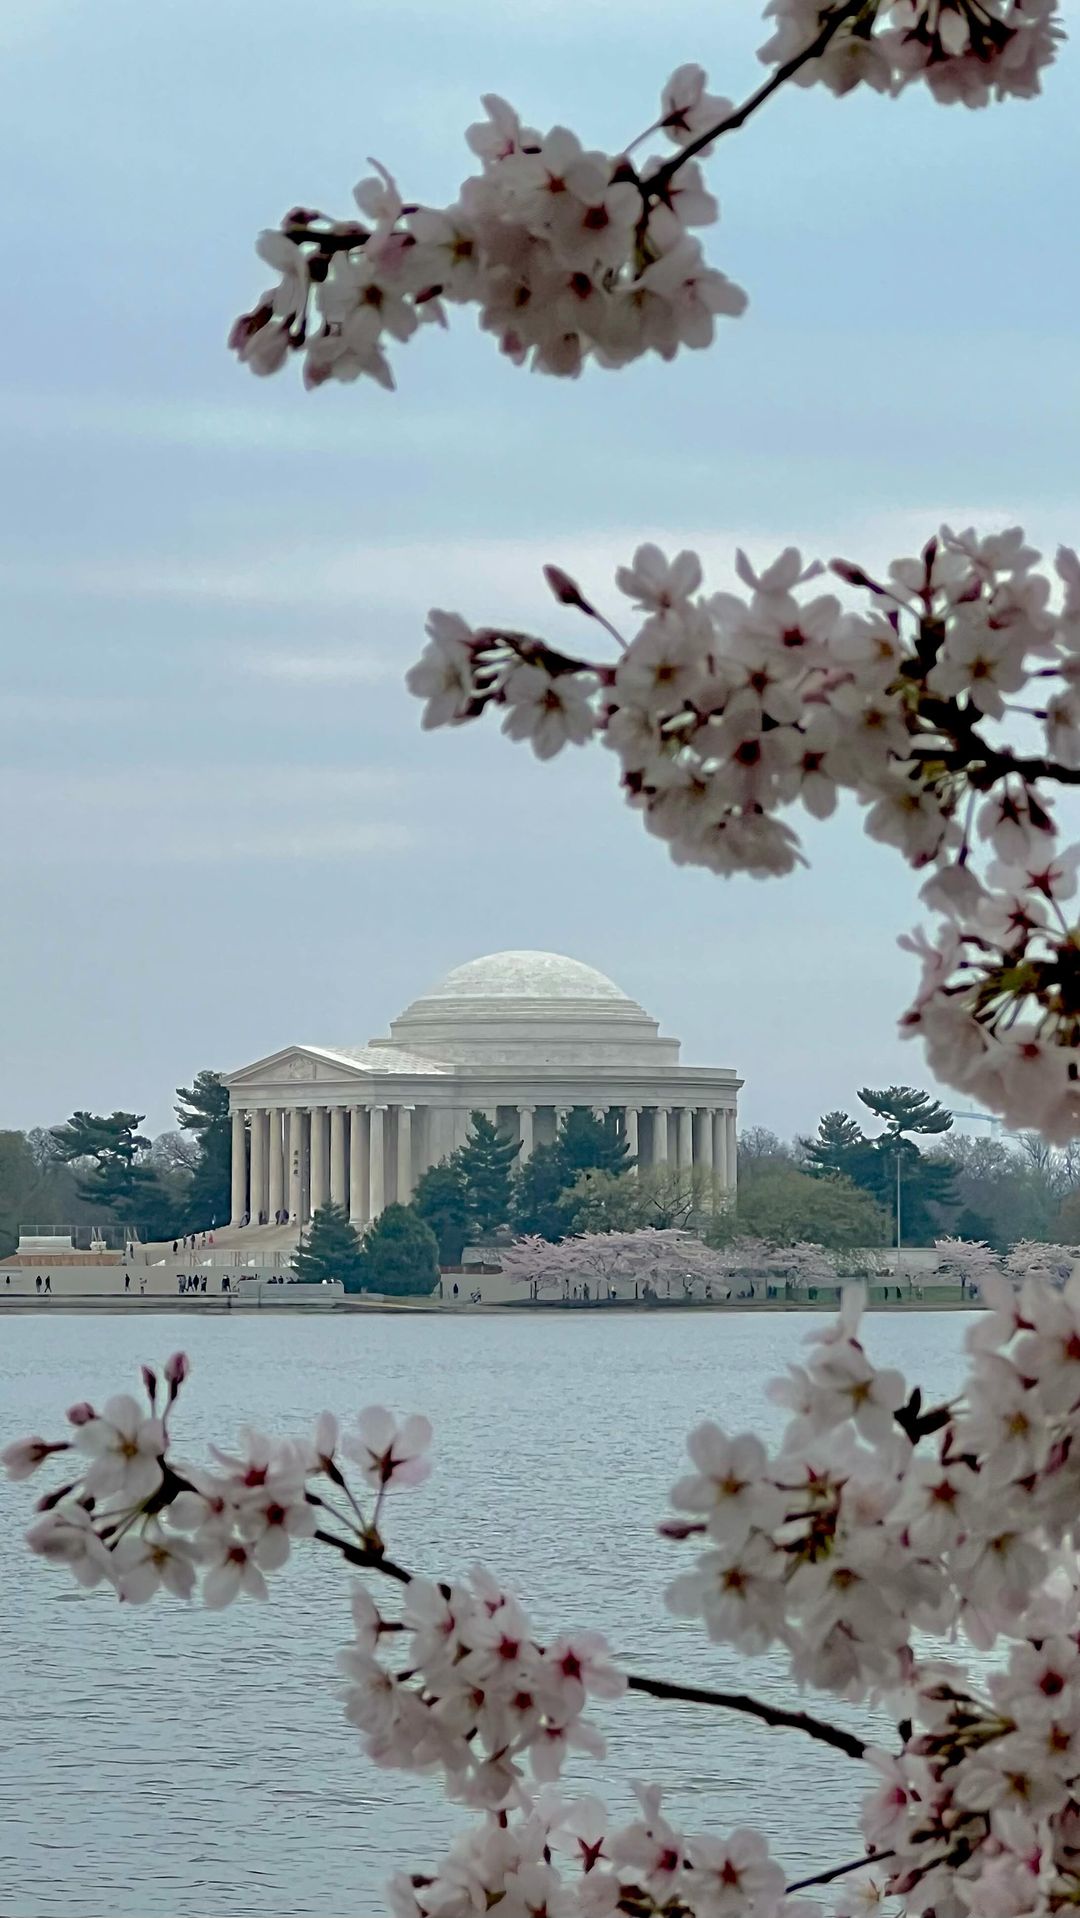 Historical Landmarks and Culinary Delights in Washington, D.C.